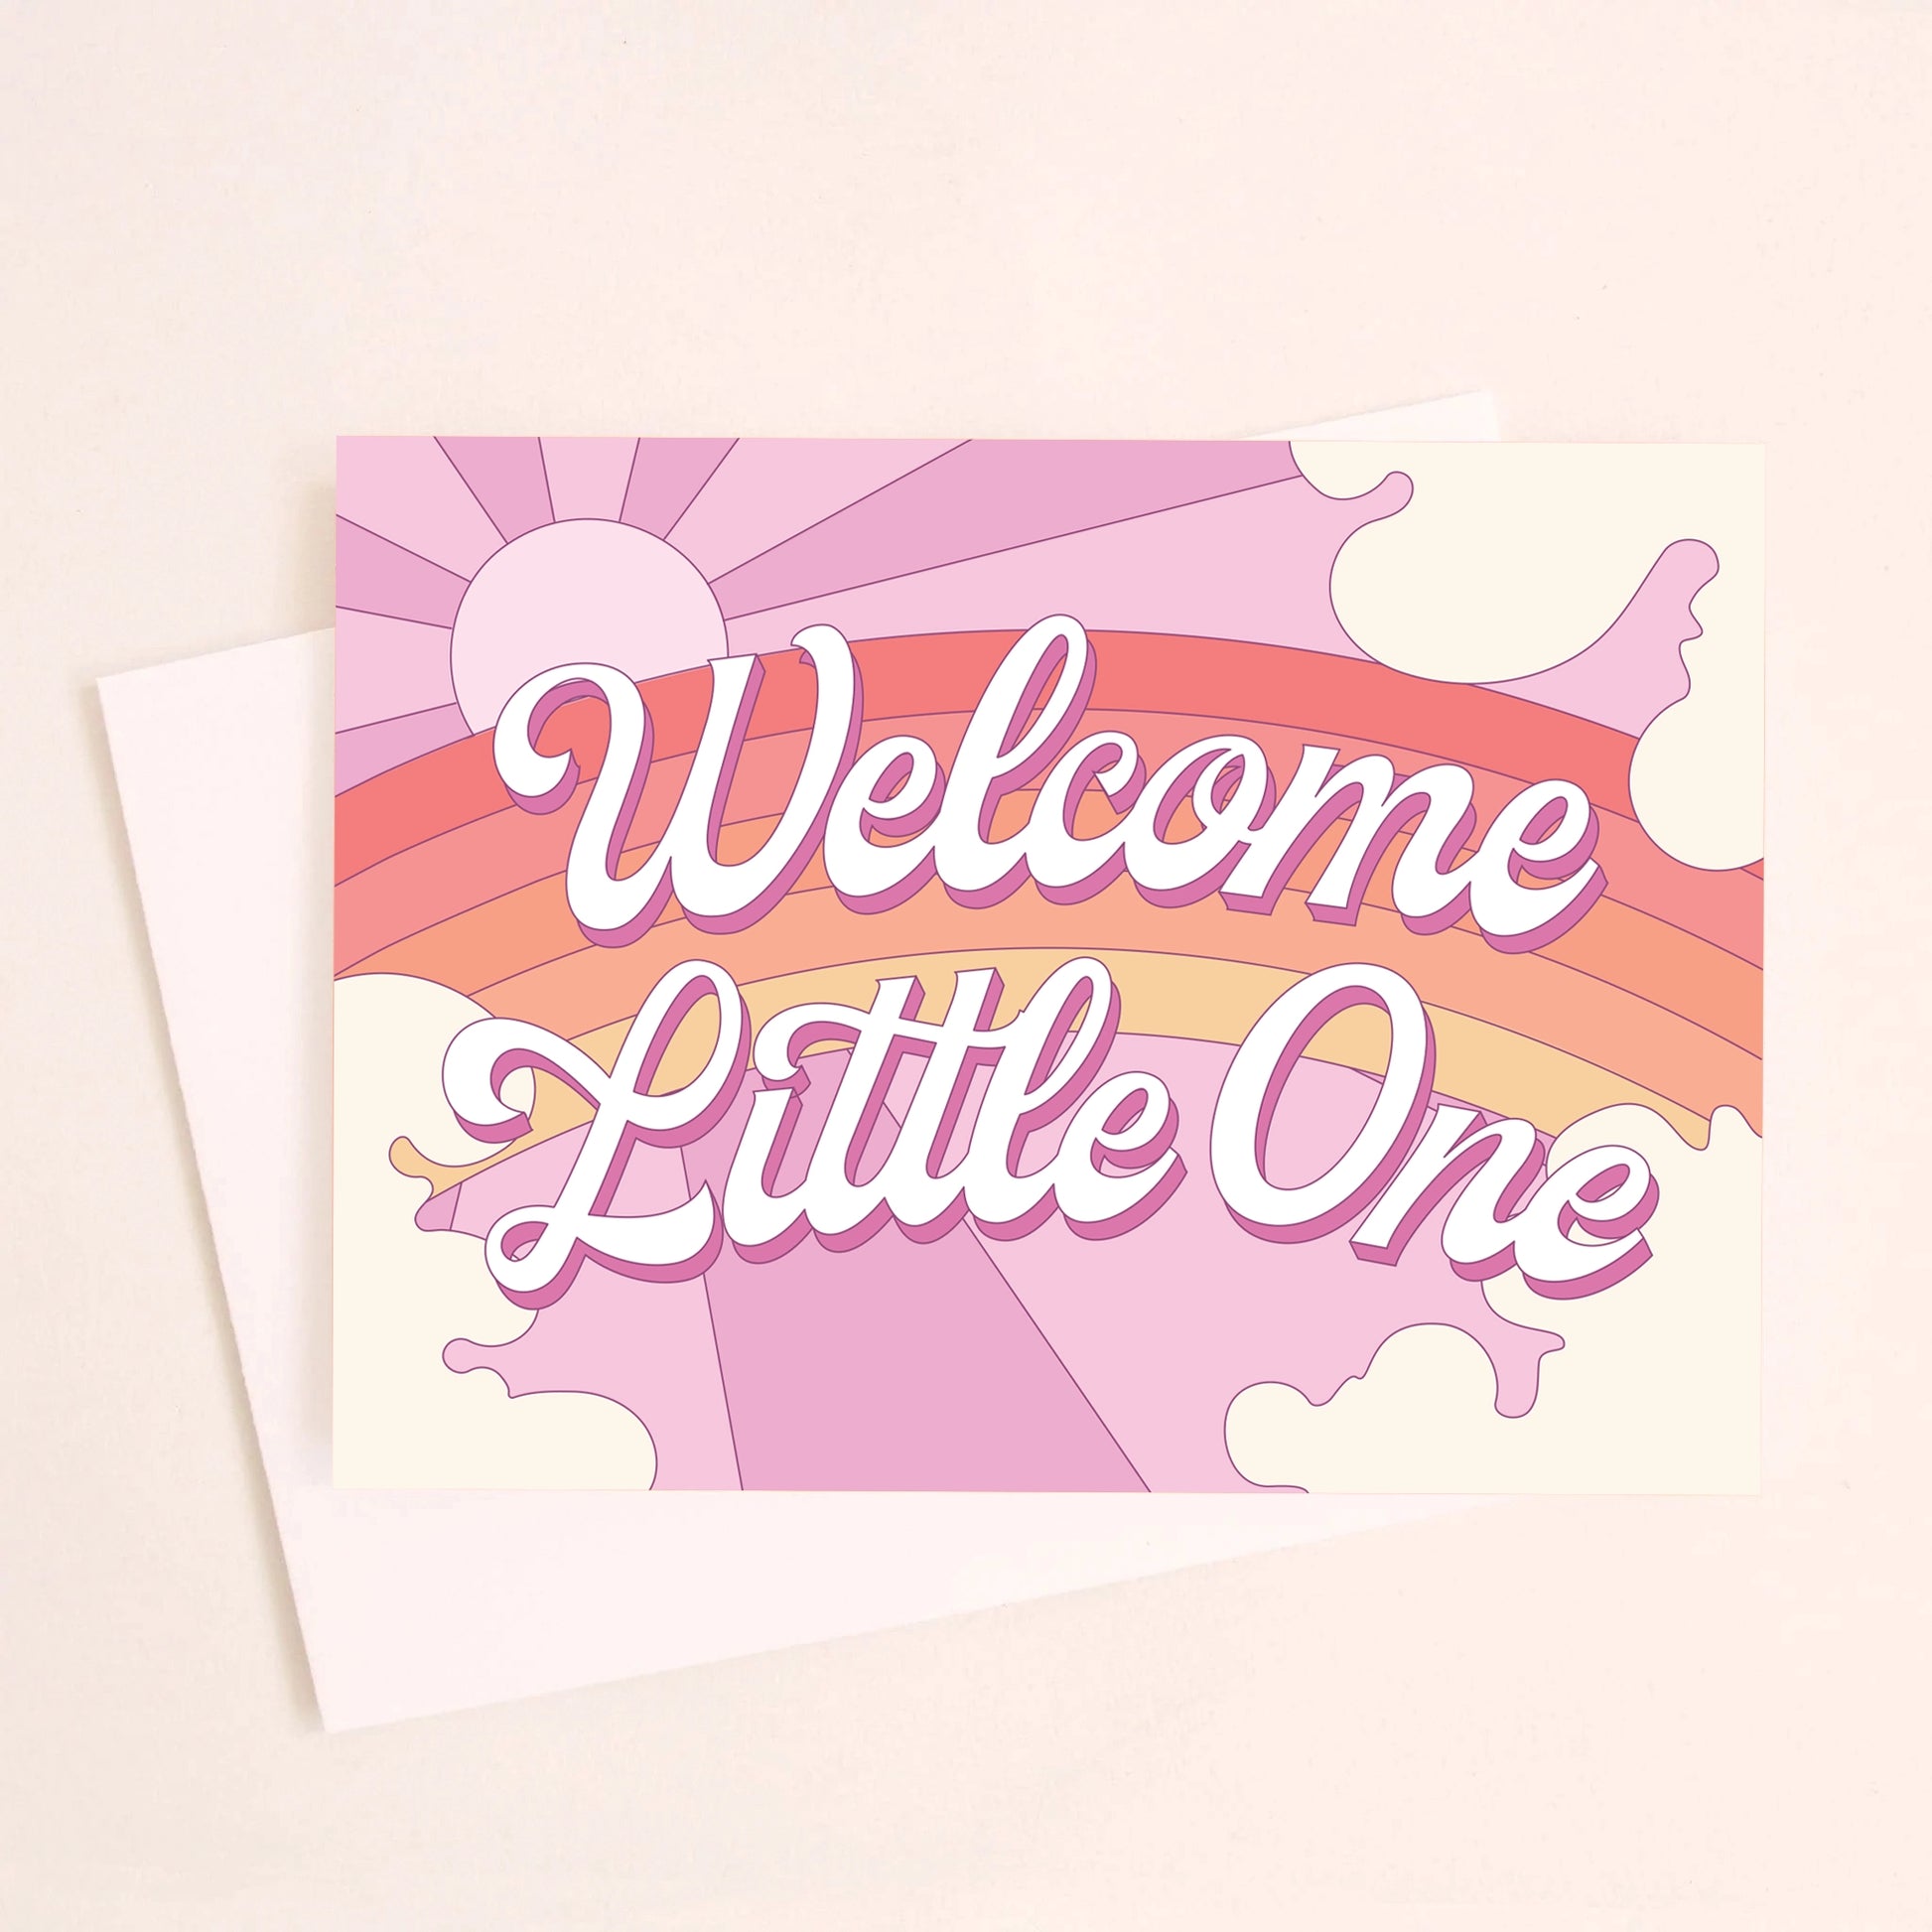 On a light pink background is a greeting card featuring a rainbow and sun graphic and white text in the center that reads, "Welcome Little One".